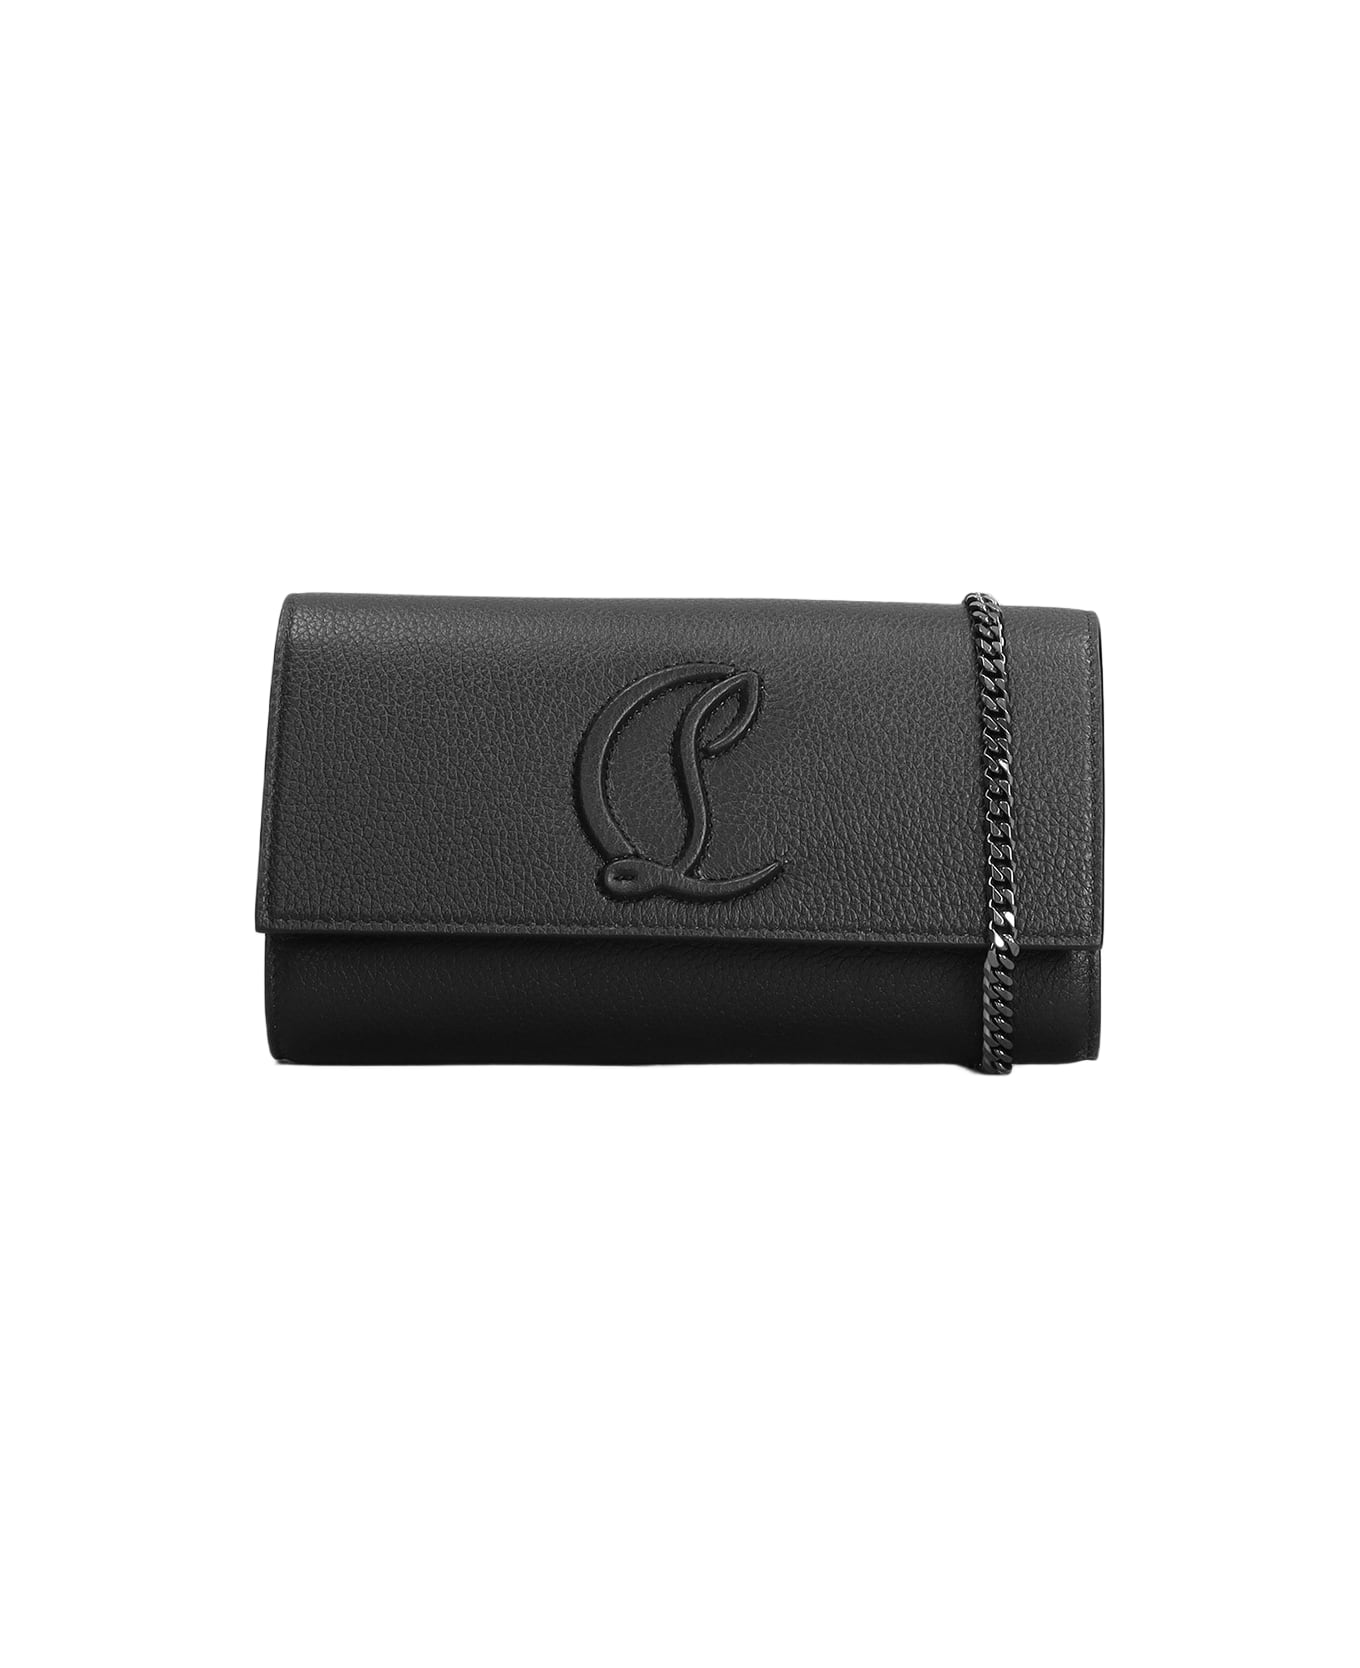 Christian Louboutin By My Side Chain Wallet In Grained Leather - Black/black